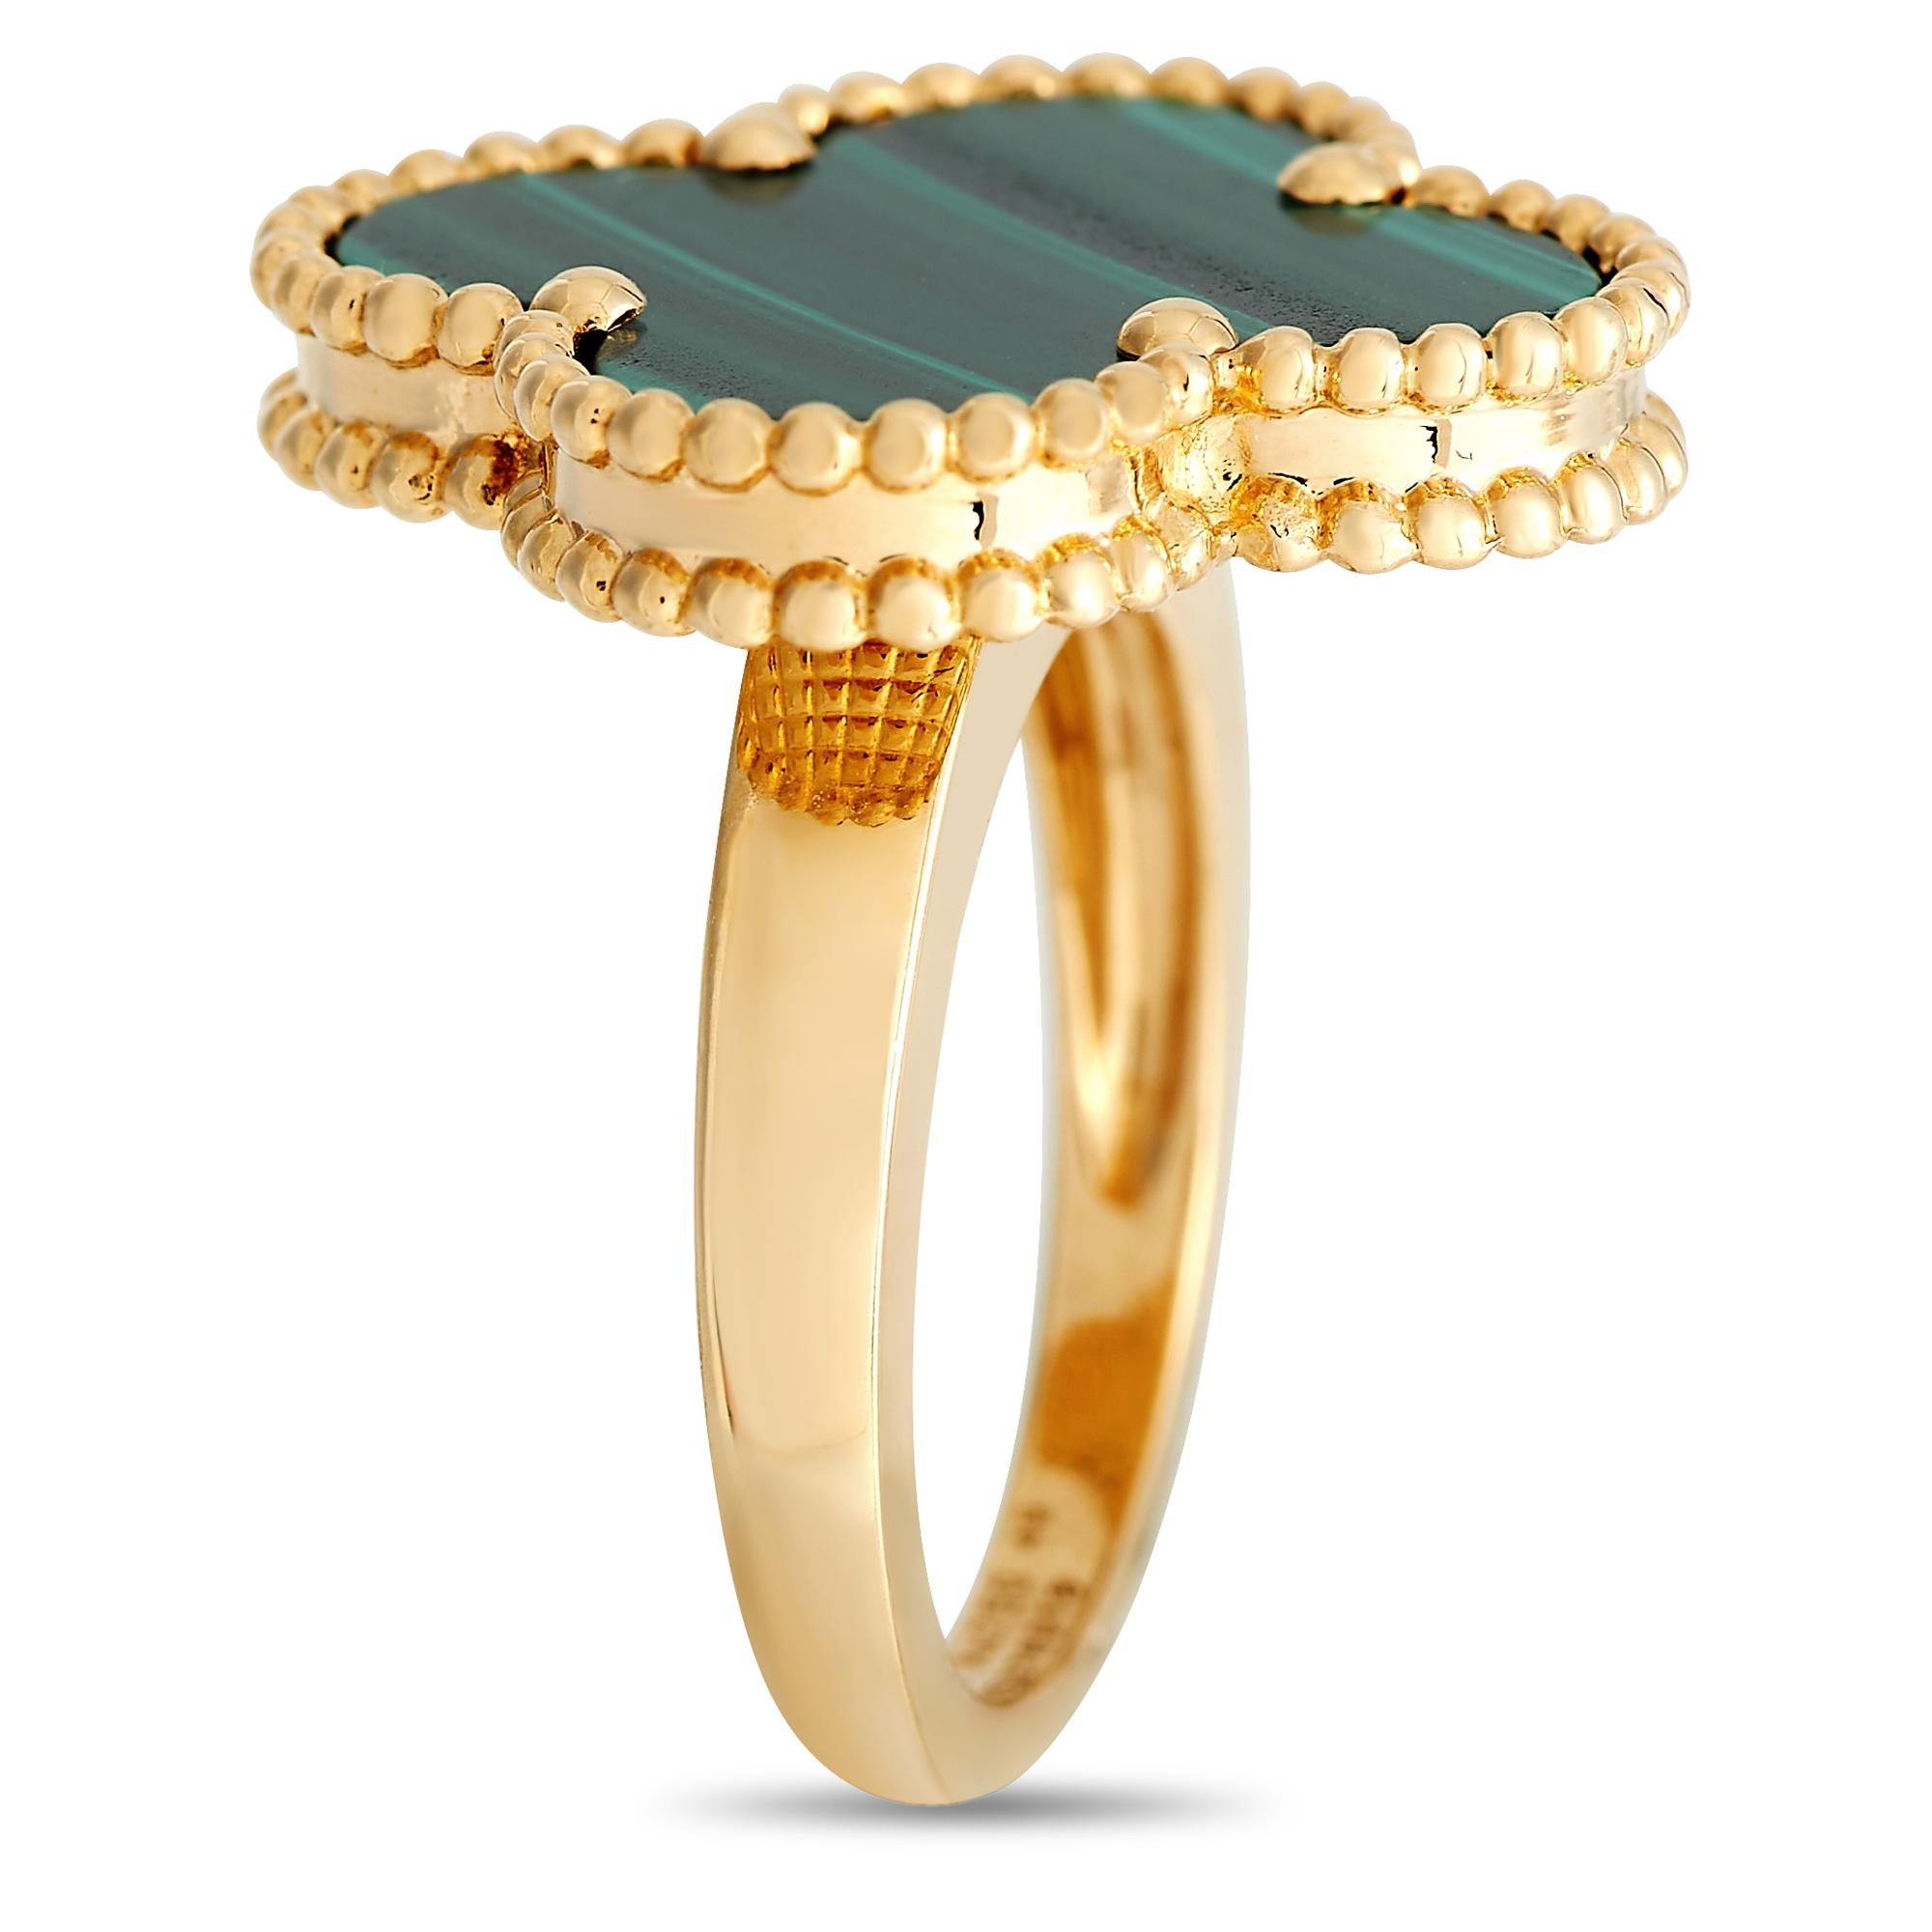 Timeless and highly coveted, this yellow gold Alhambra ring makes a statement with its four-leaf clover design made more prominent by a rich green malachite inlay. The ring's top dimensions measure 20 mm by 20 mm.This Van Cleef & Arpels Alhambra 18K